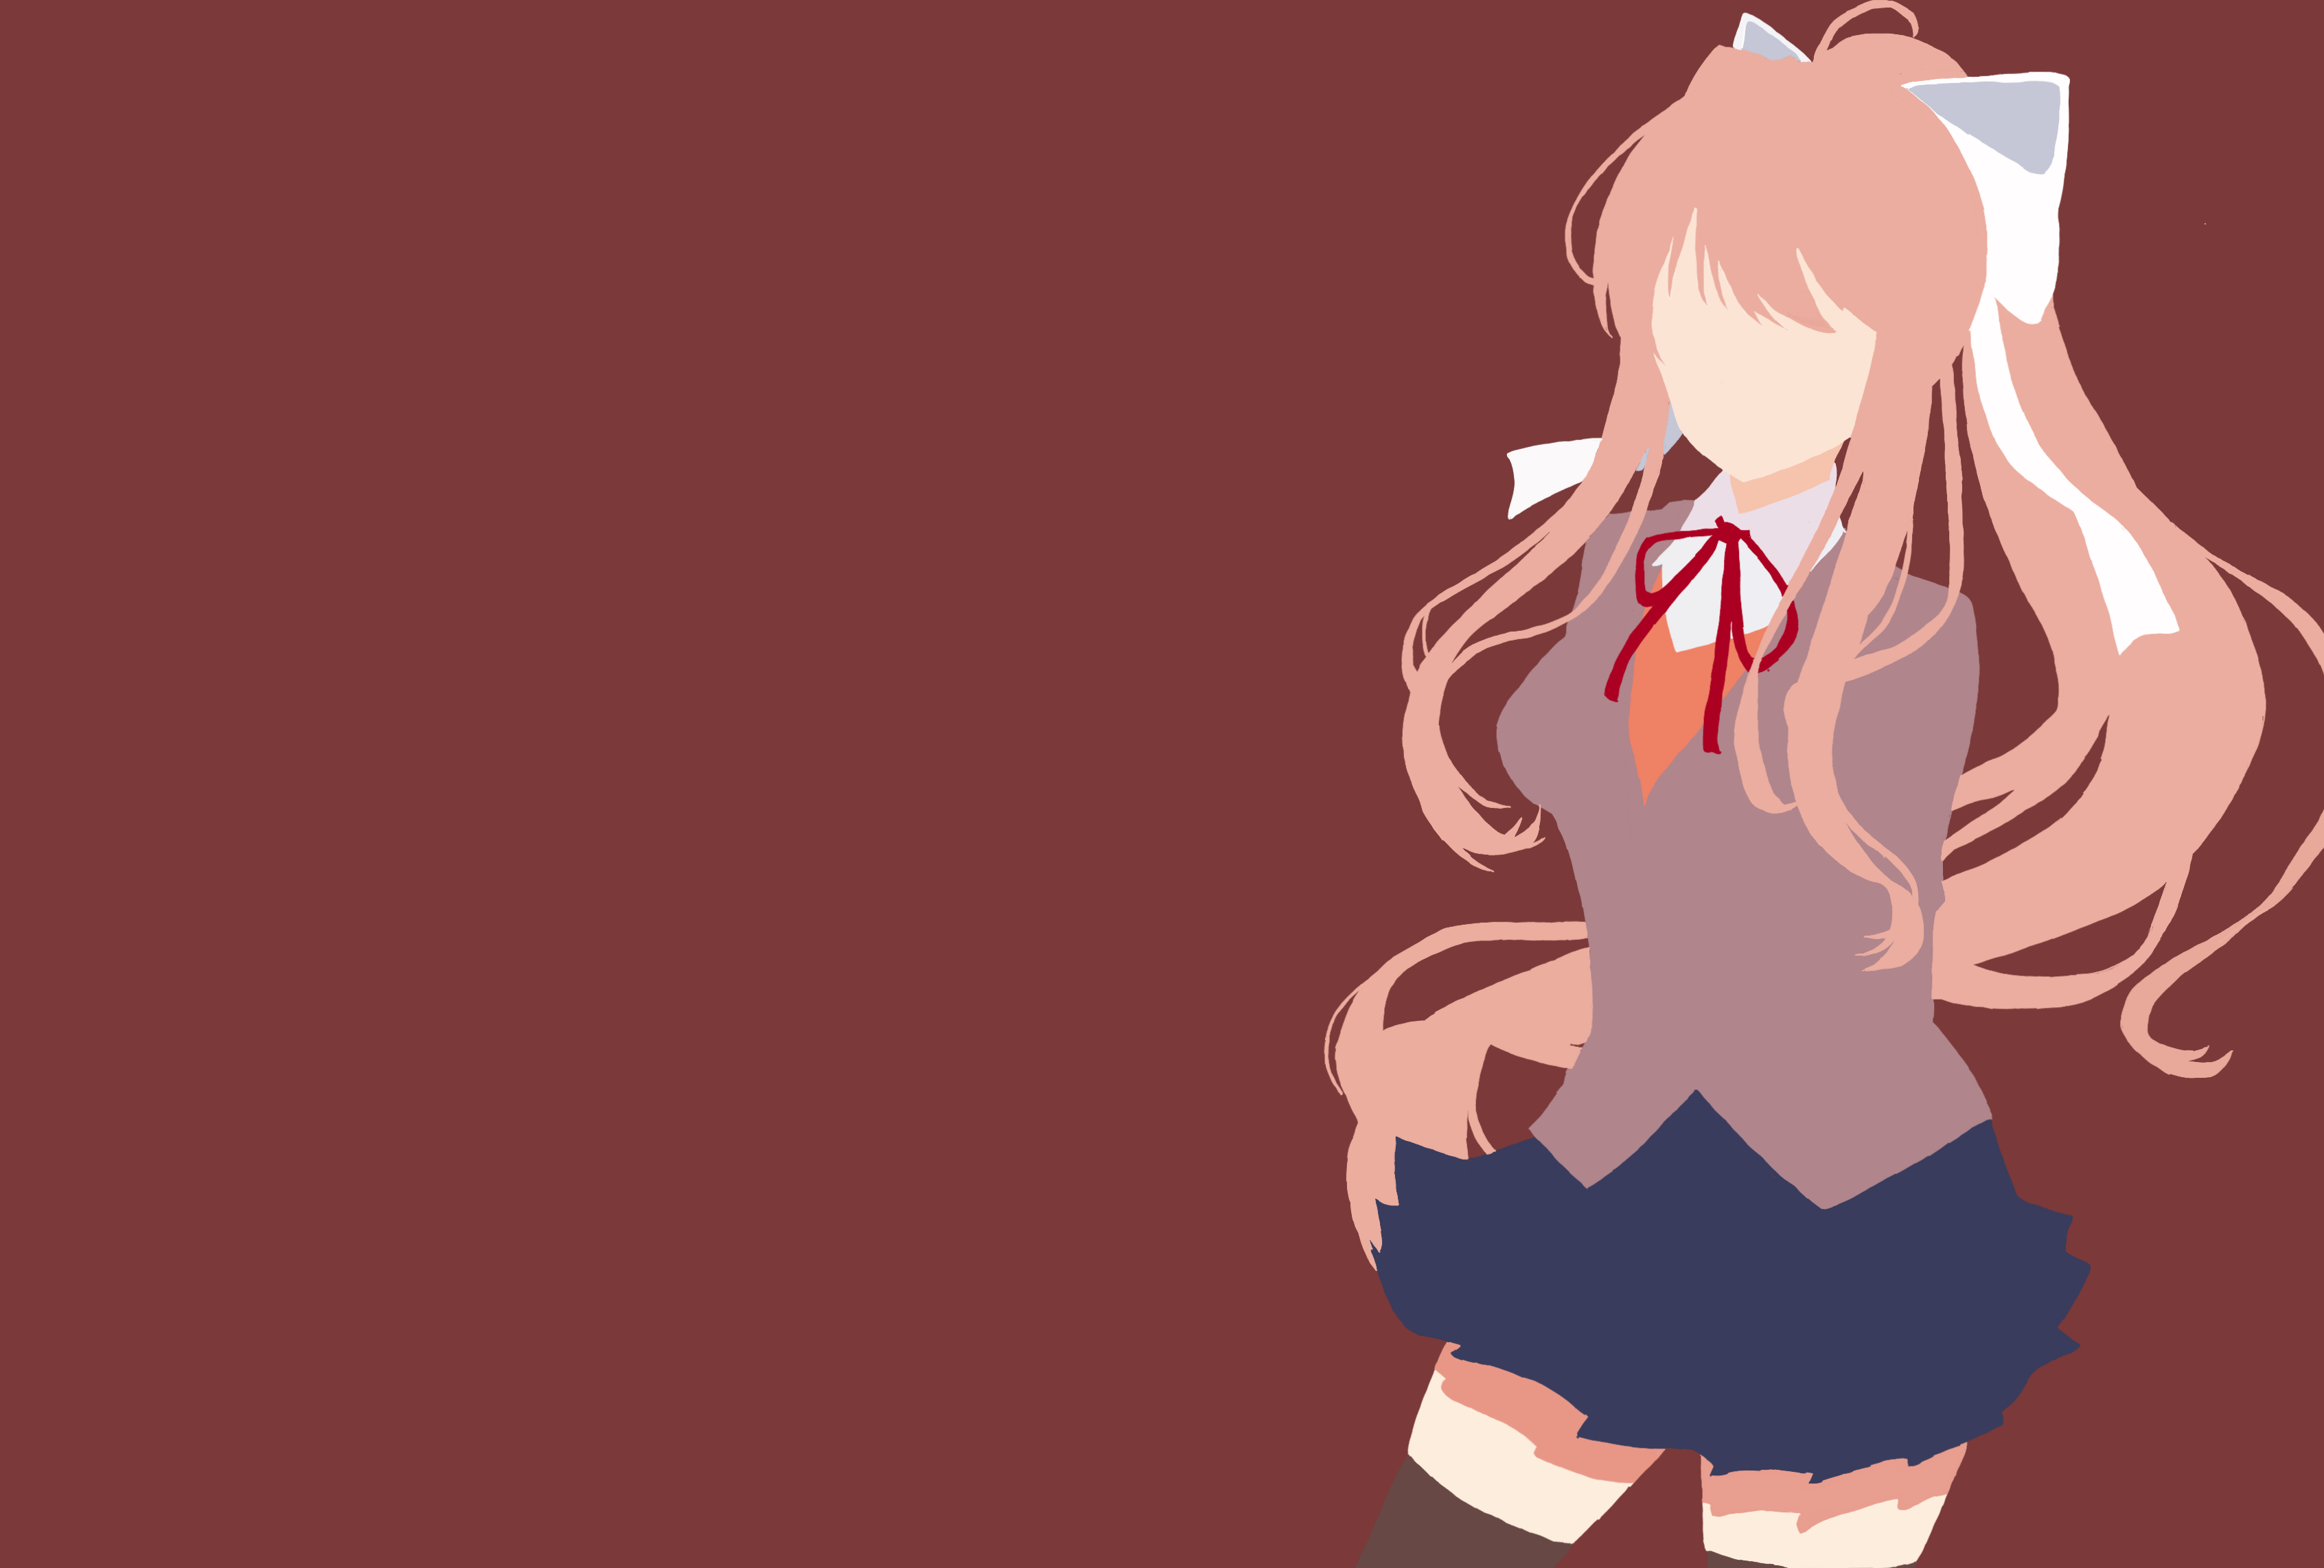 Monika Wallpapers posted by Ethan Sellers.